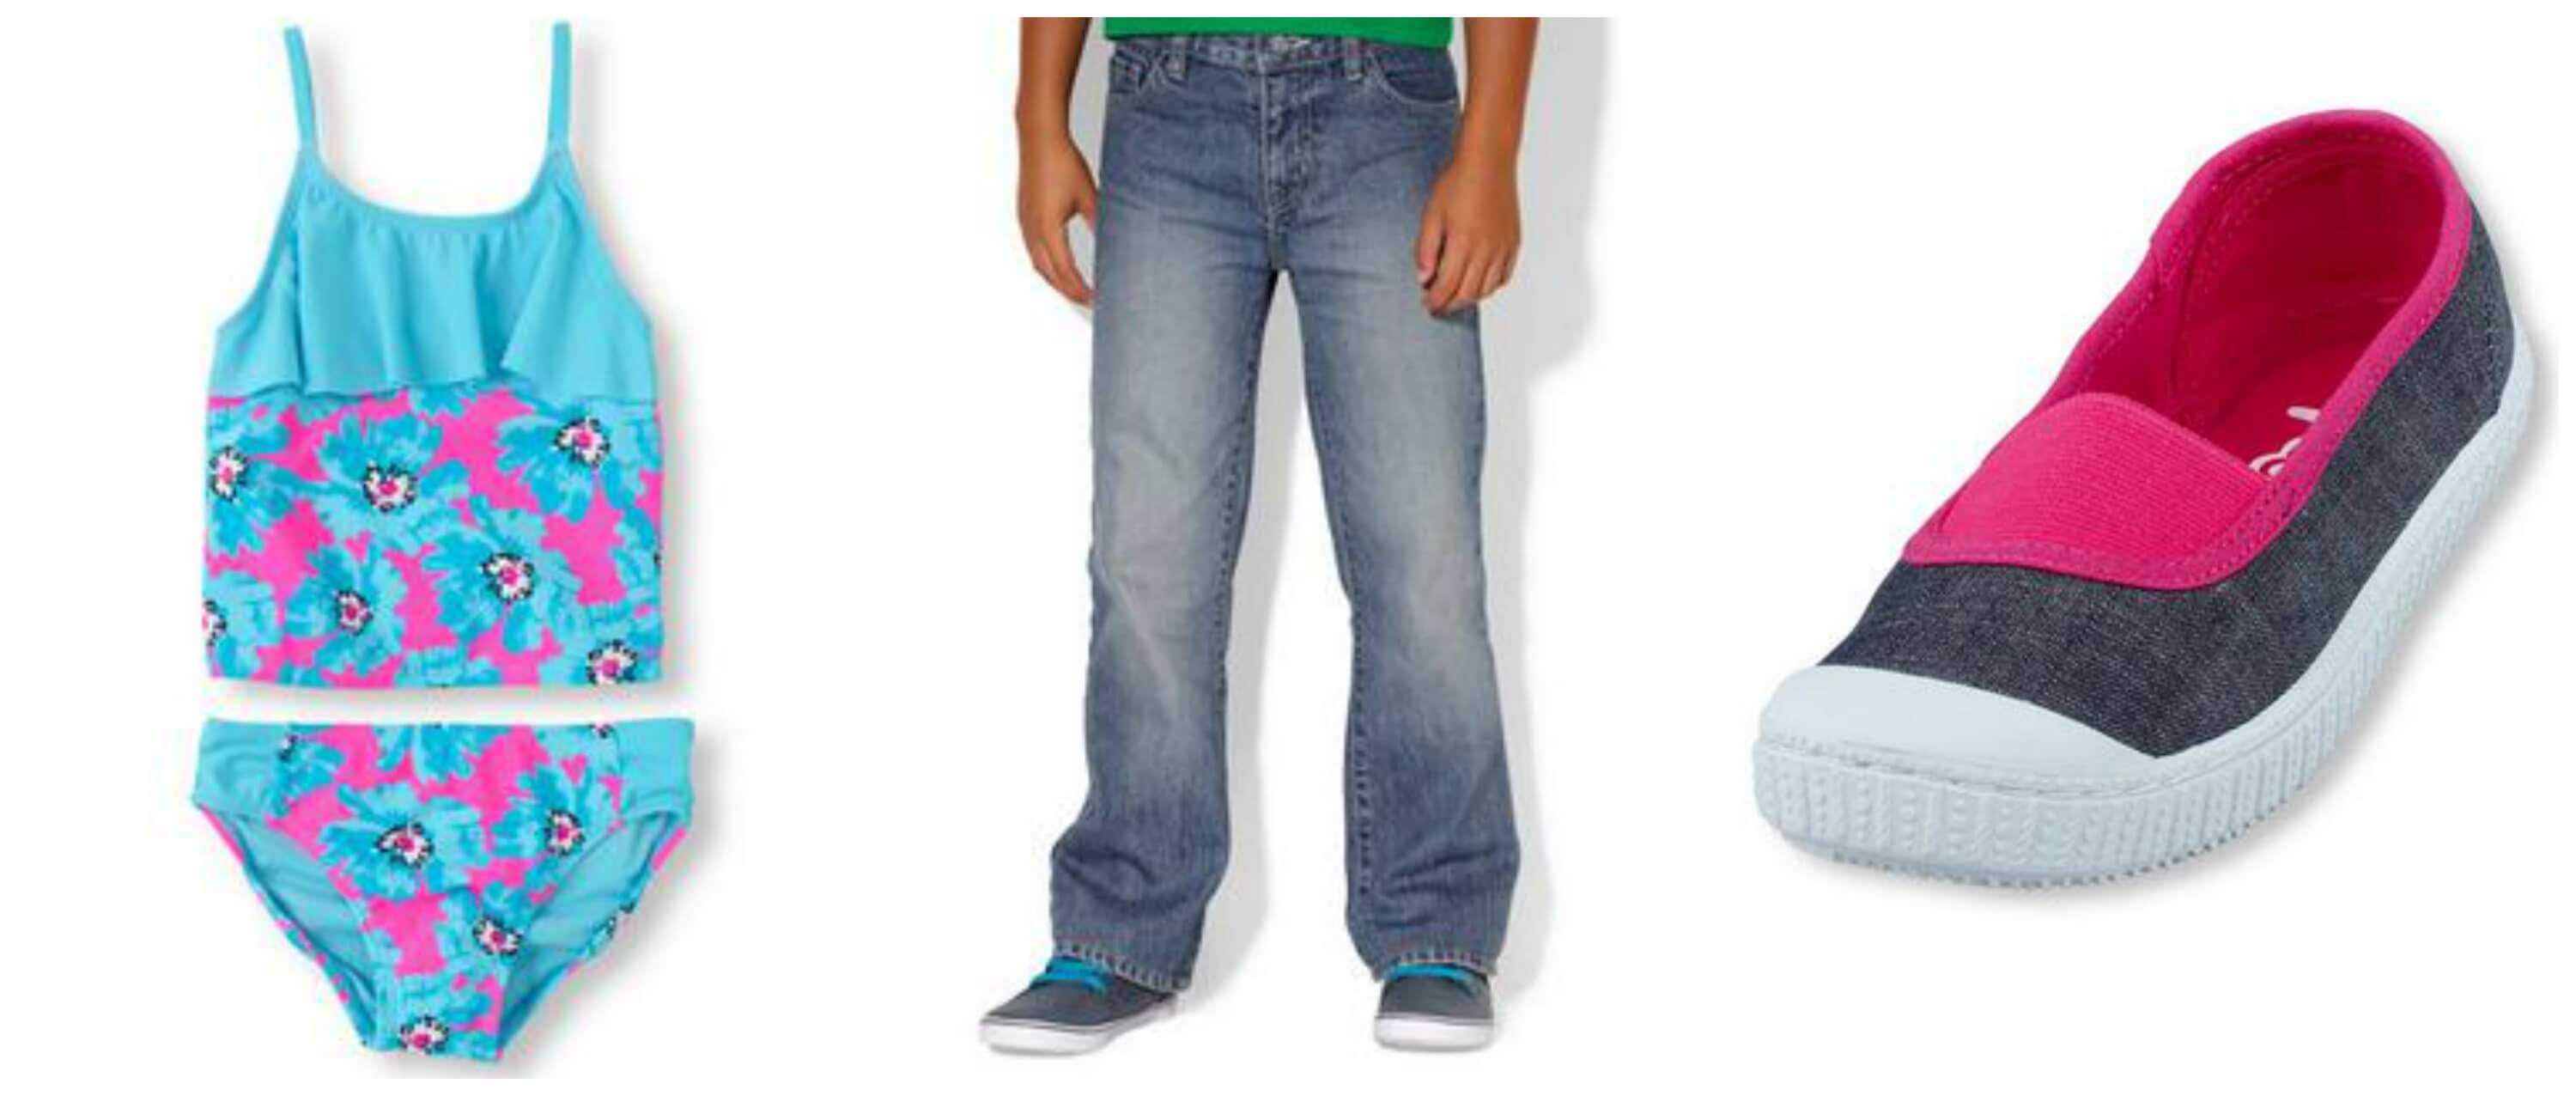 The Children's Place: Clearance Blowout Sale With Prices Up To 75% Off + FREE Shipping